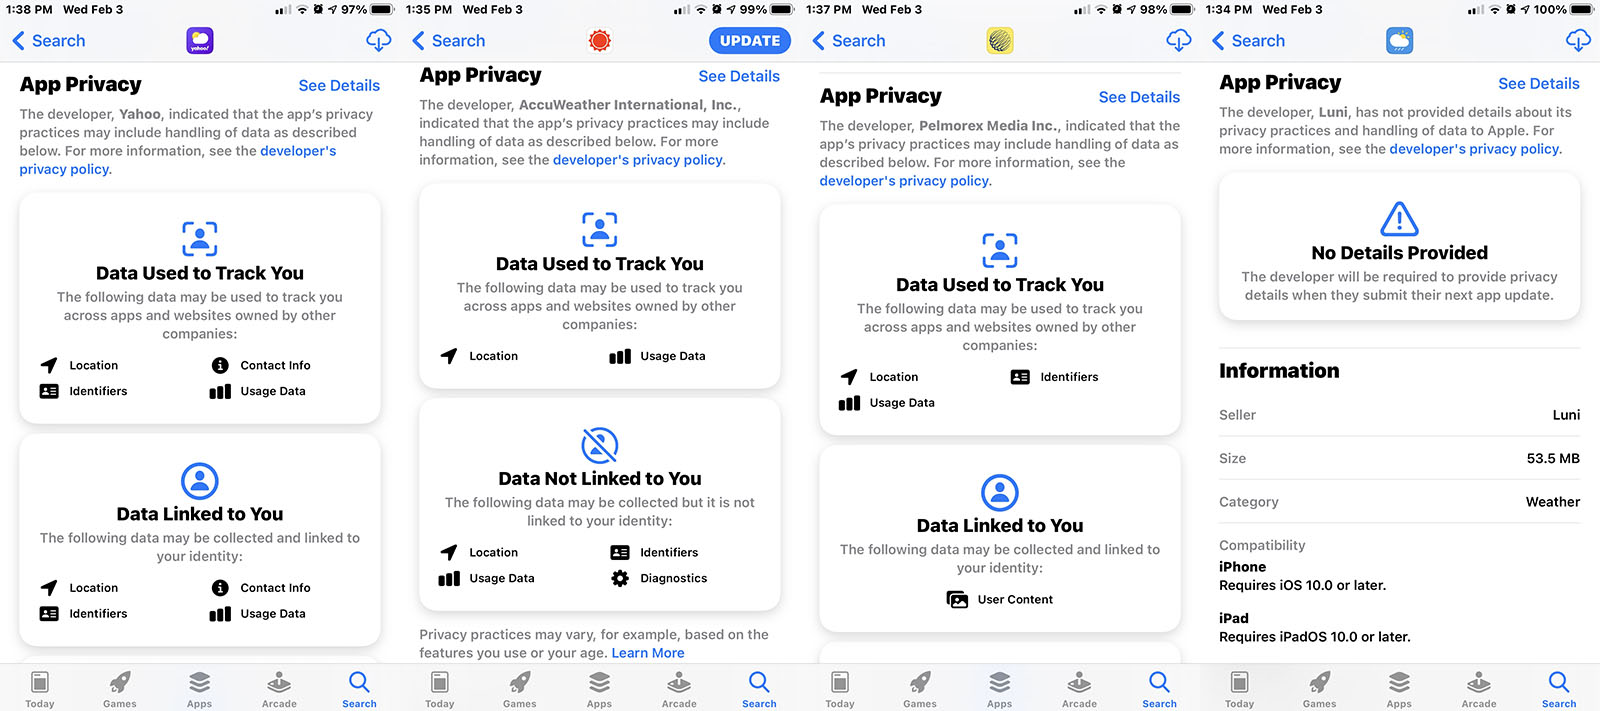 ©_MESH_Nimesh_Devkota_PRIVACY_ISSUES_CONCERNING-THE-THIRD-PARTY-APPLICATIONS-UX_PROCESS-CASE-STUDY-BRIEF-Competitive-Analysis-YAHOO-ACCUWEATHER-DARK-SKY-THE WEATHER-NETWORK-APPLE-FROM-THE-APP-STORE-V1